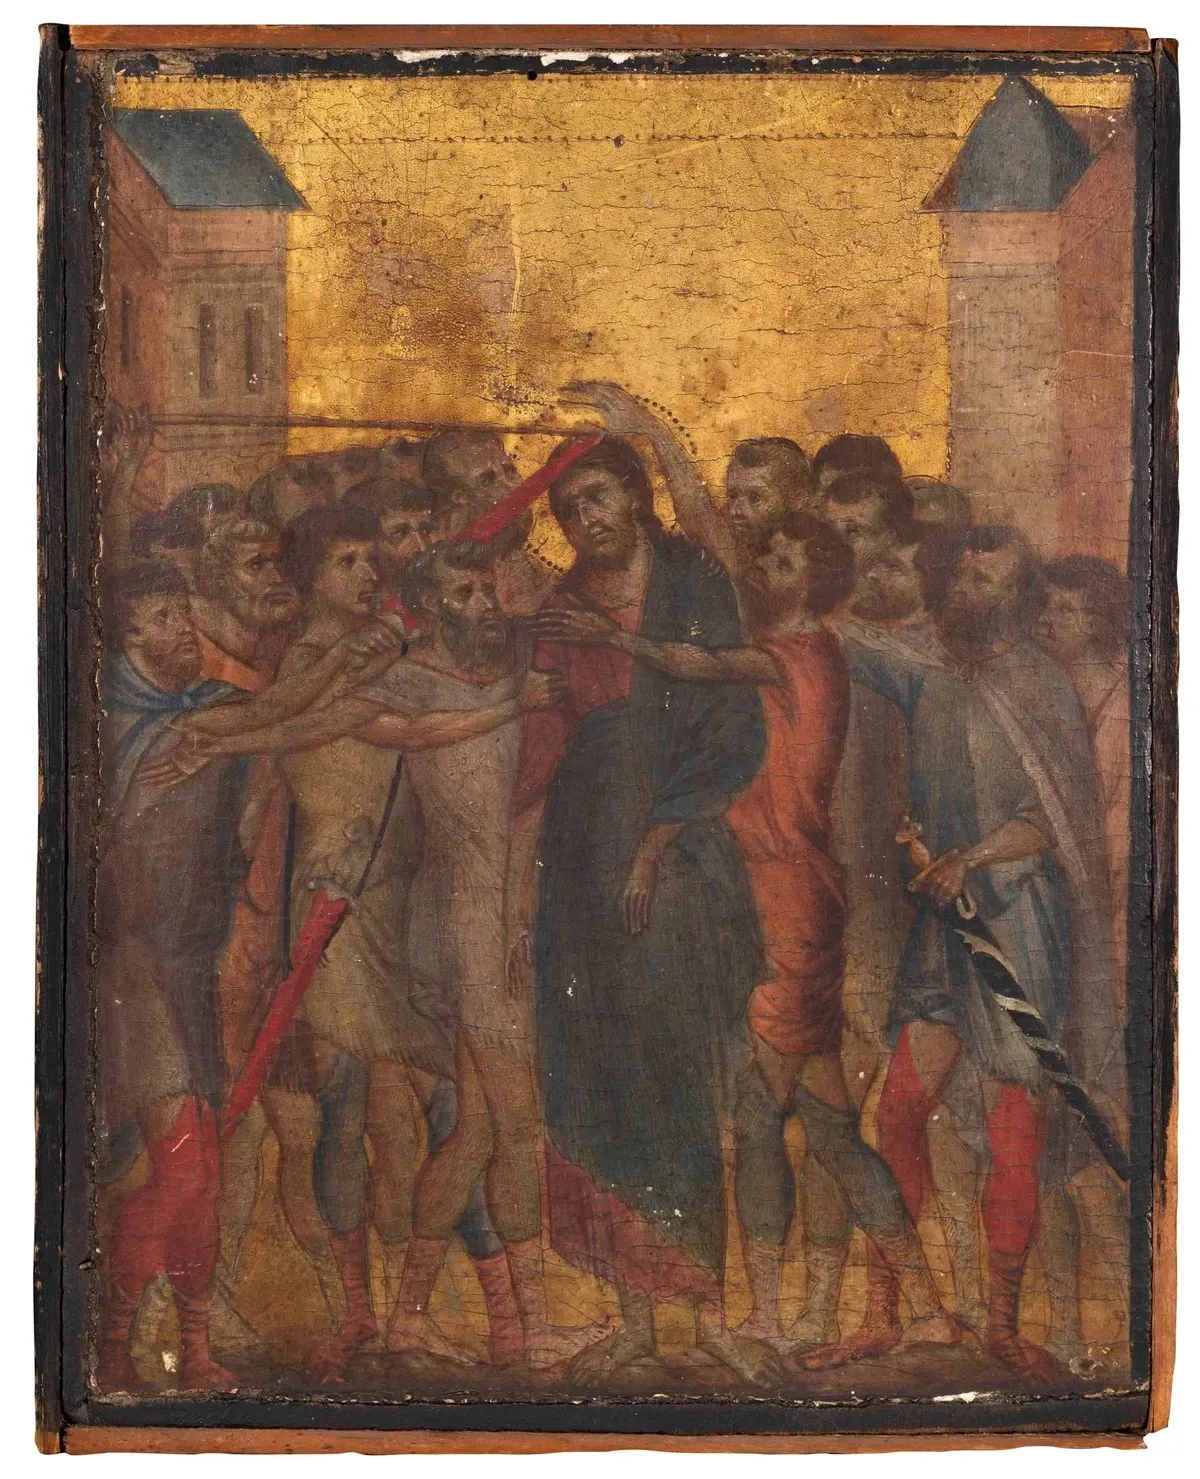 A group of people clustered around a Christ figure against a background of buildings and gold leaf.